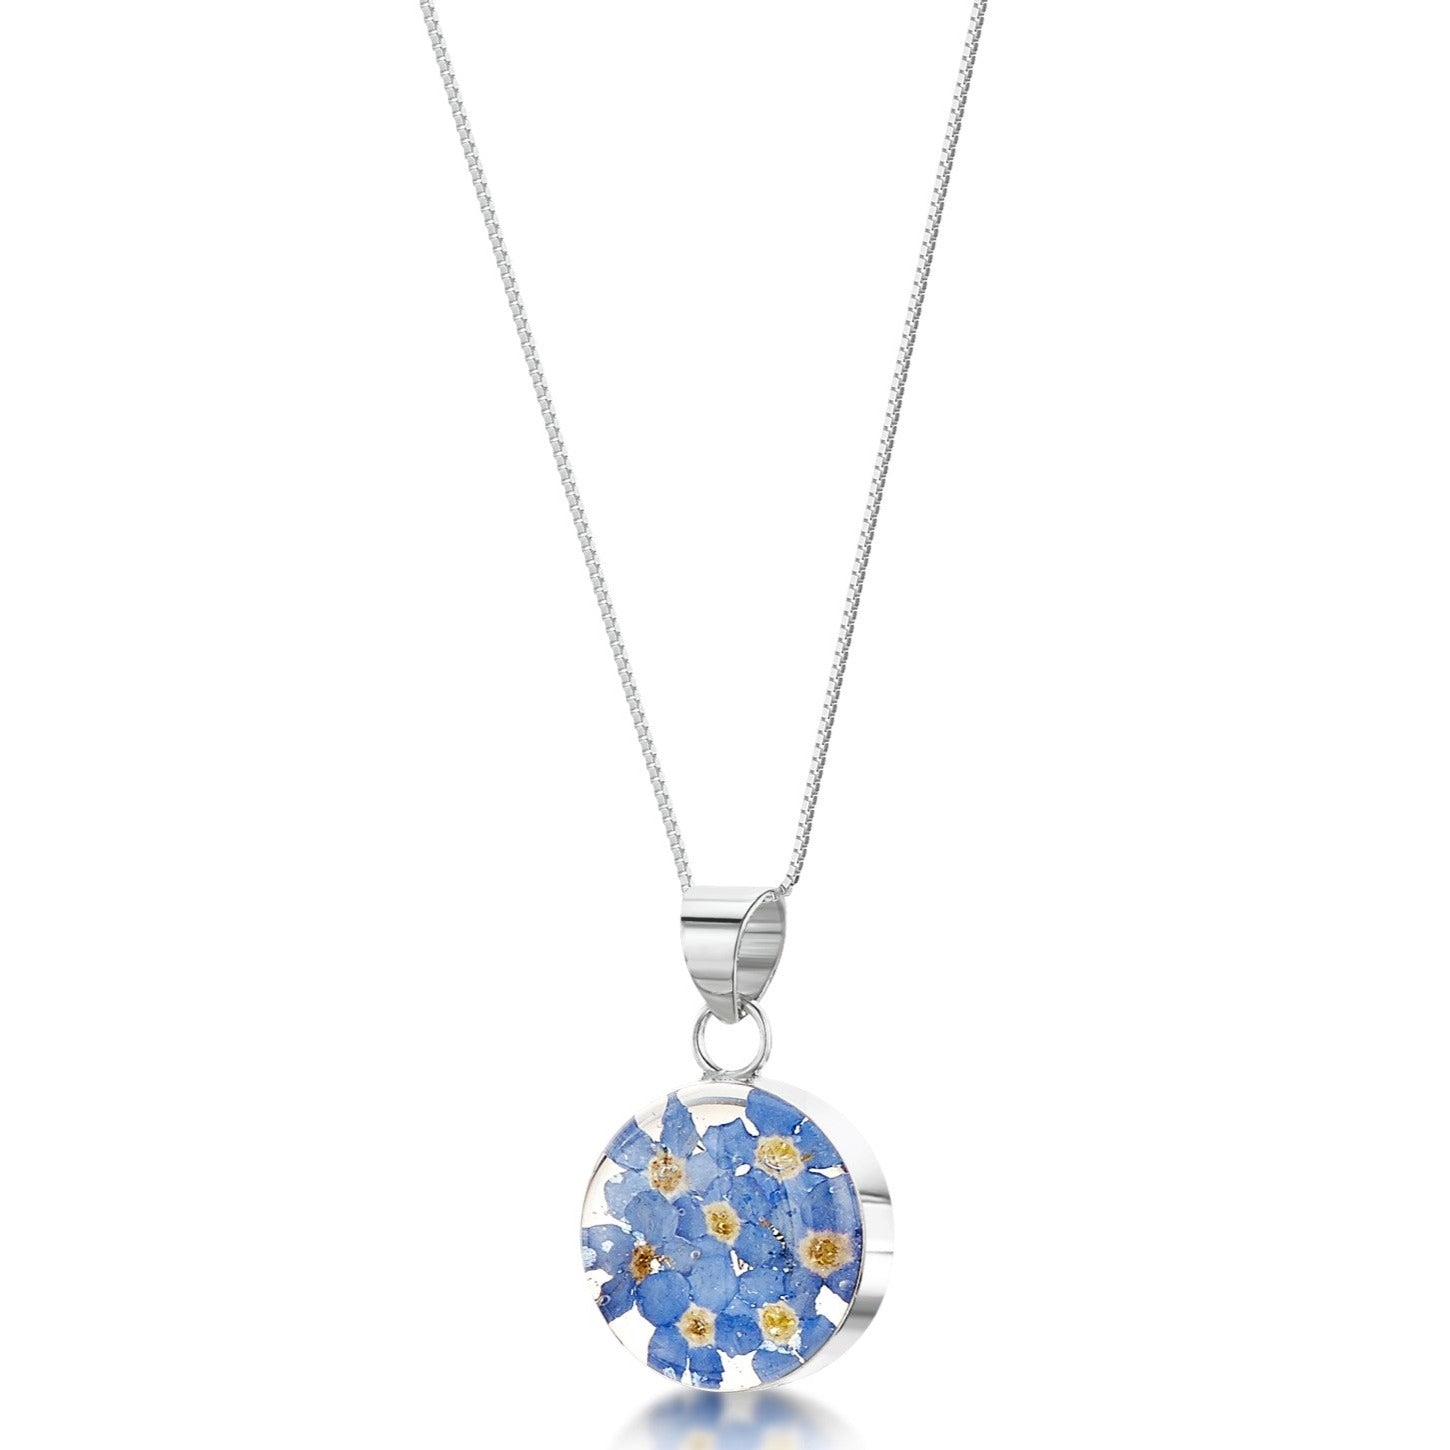 Sterling silver round pendant with real forget-me-not flowers set in resin. Hangs on an adjustable 18 inch sterling silver chain.